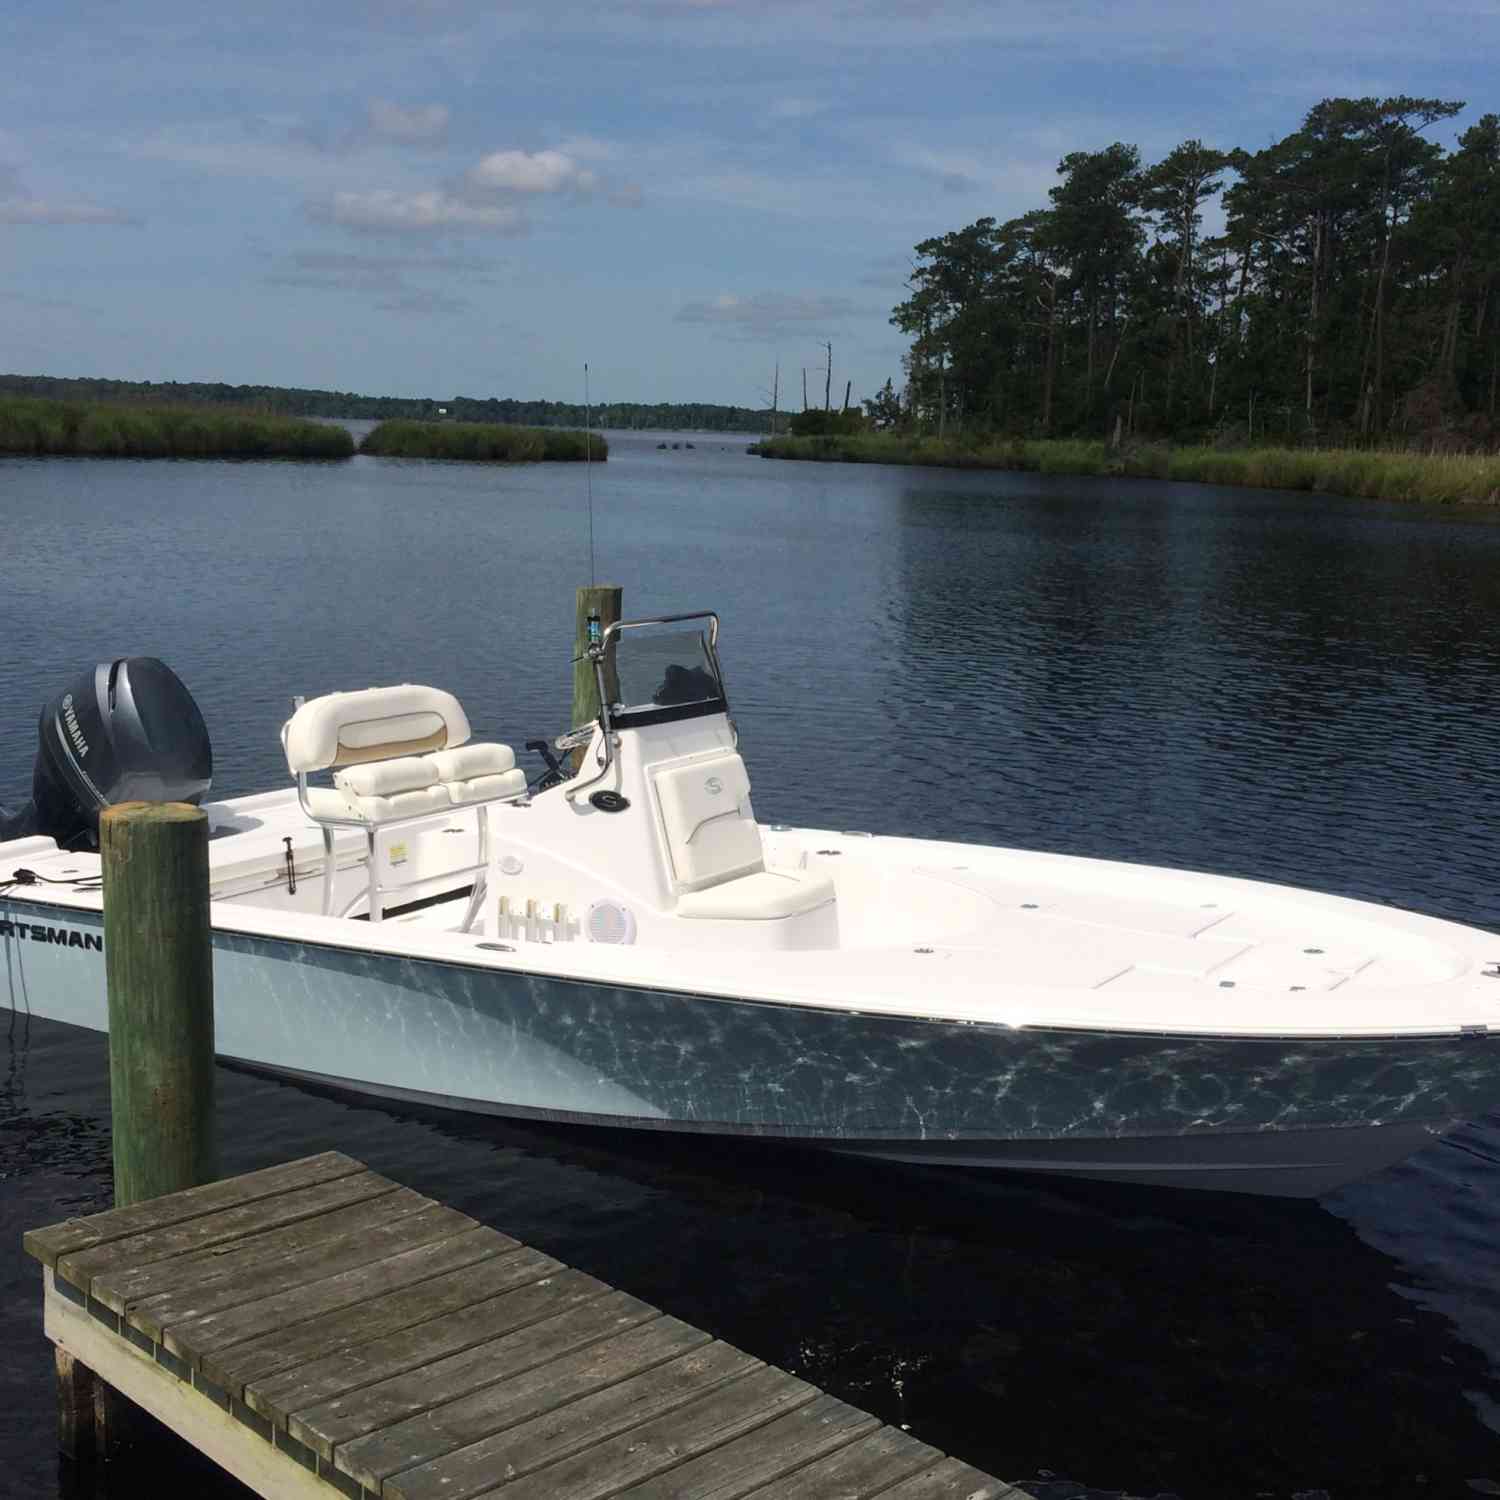 Title: Beautiful day - On board their Sportsman Masters 207 Bay Boat - Location: Mallard Creek, Beaufort County, NC. Participating in the Photo Contest #SportsmanApril2021